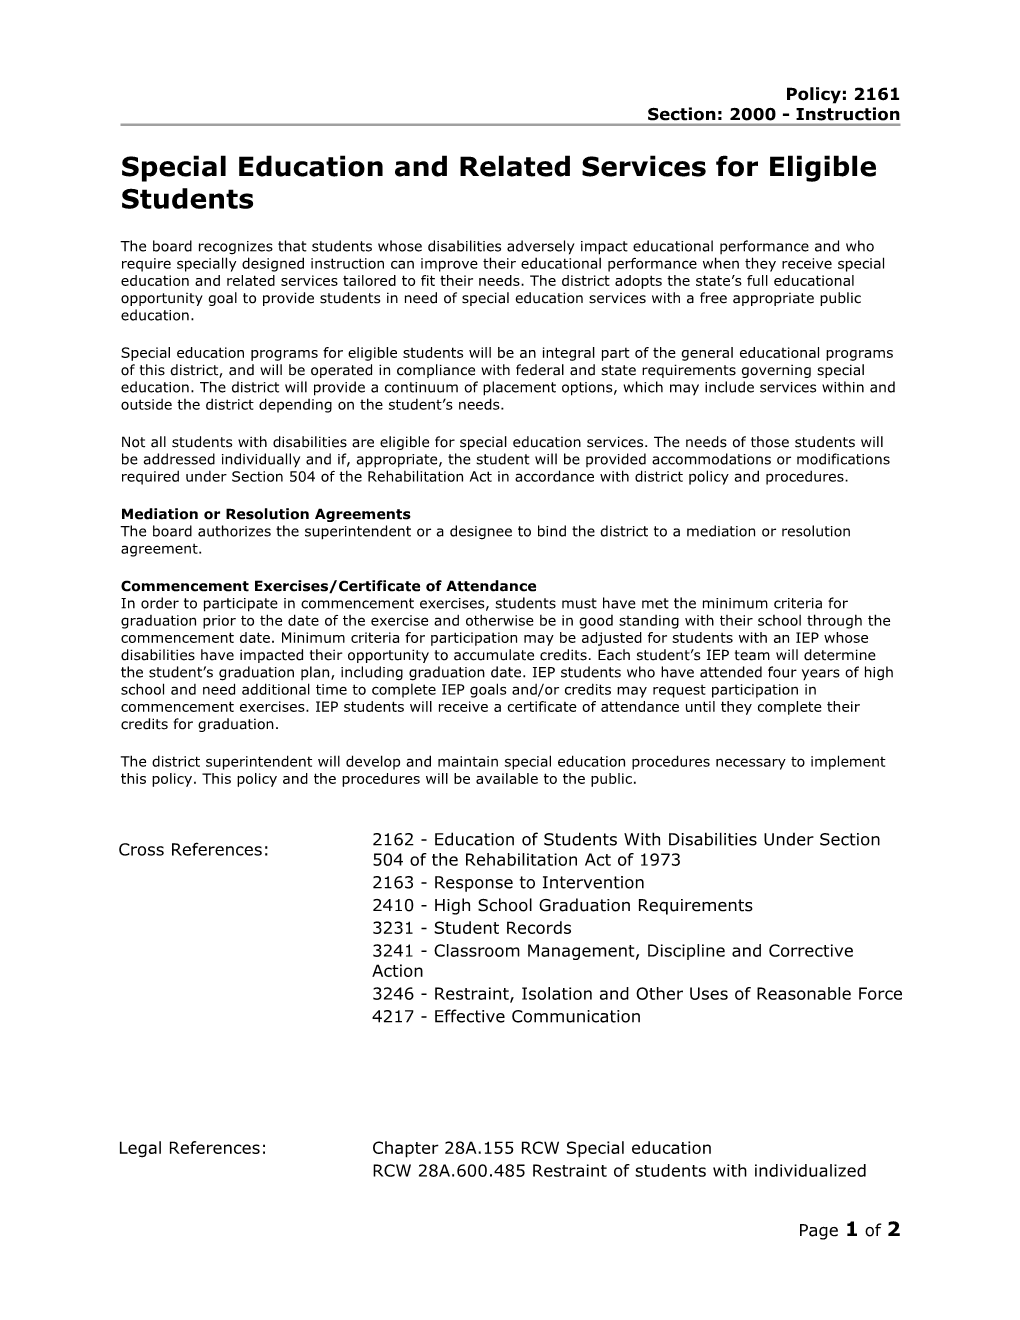 Special Education and Related Services for Eligible Students